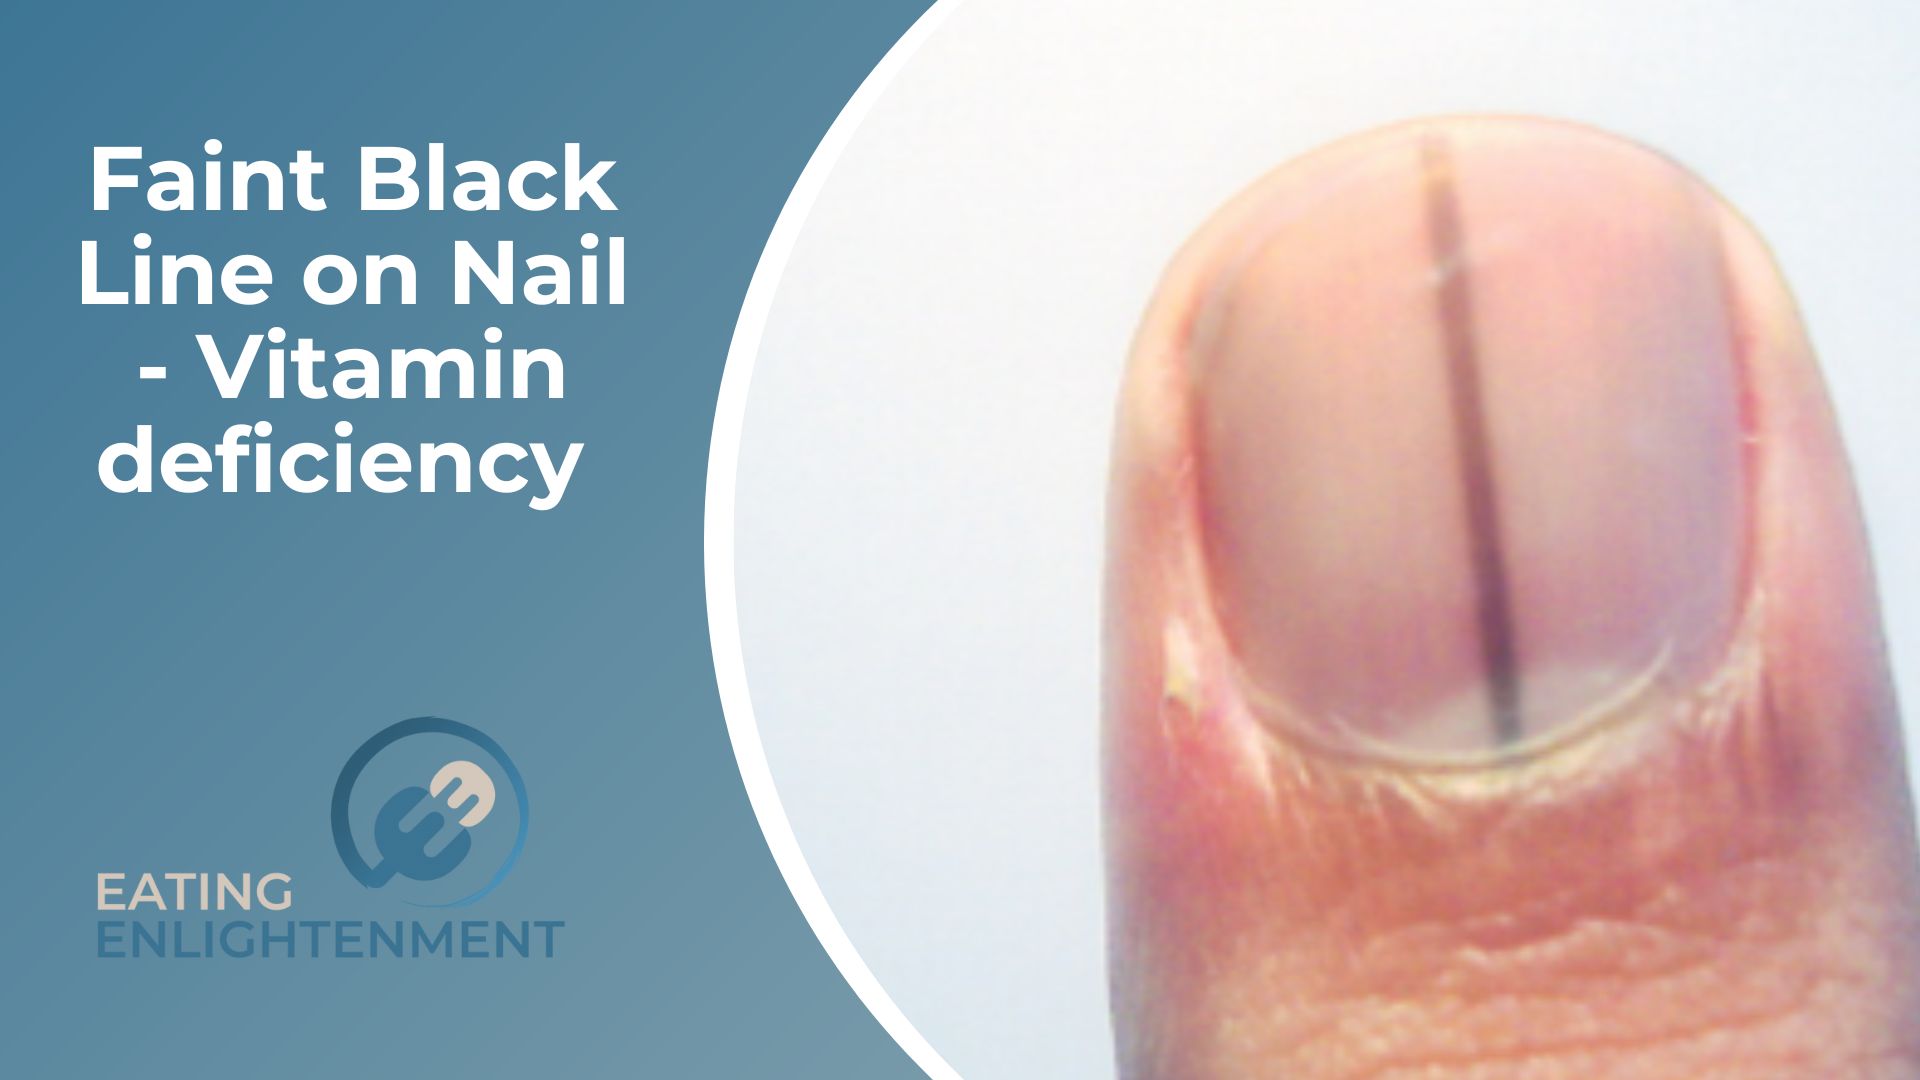 Can Vitamin Deficiency Cause Ridges On Fingernails?